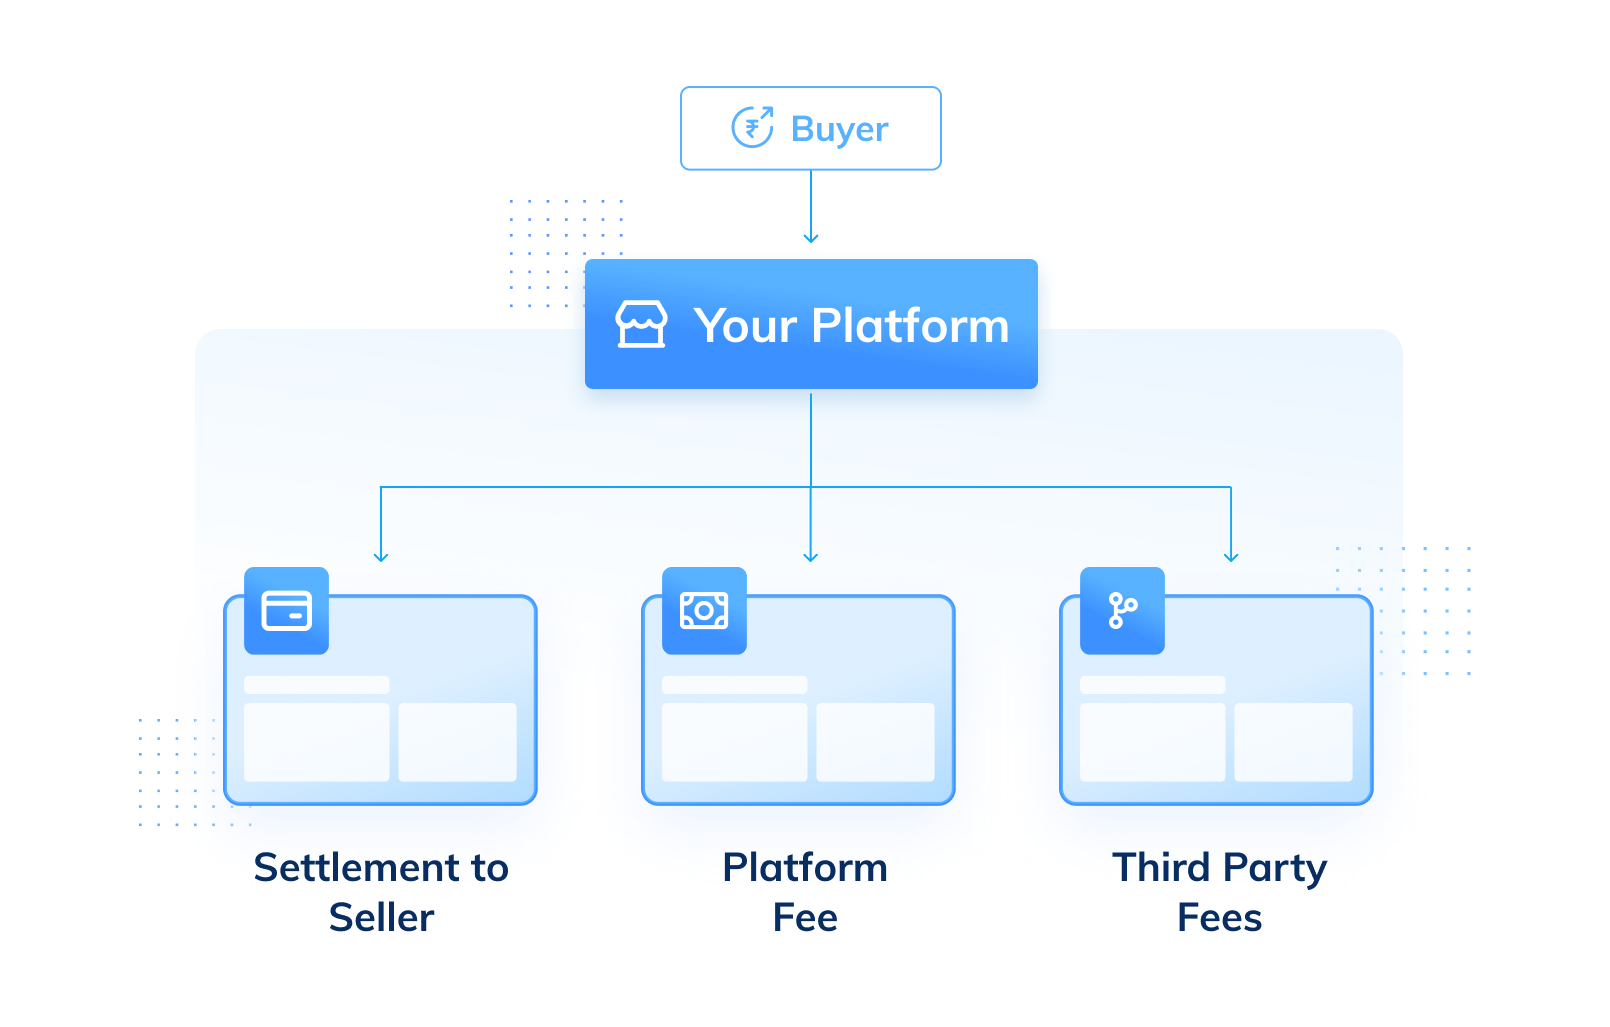 Control the Flow of Funds for Platforms